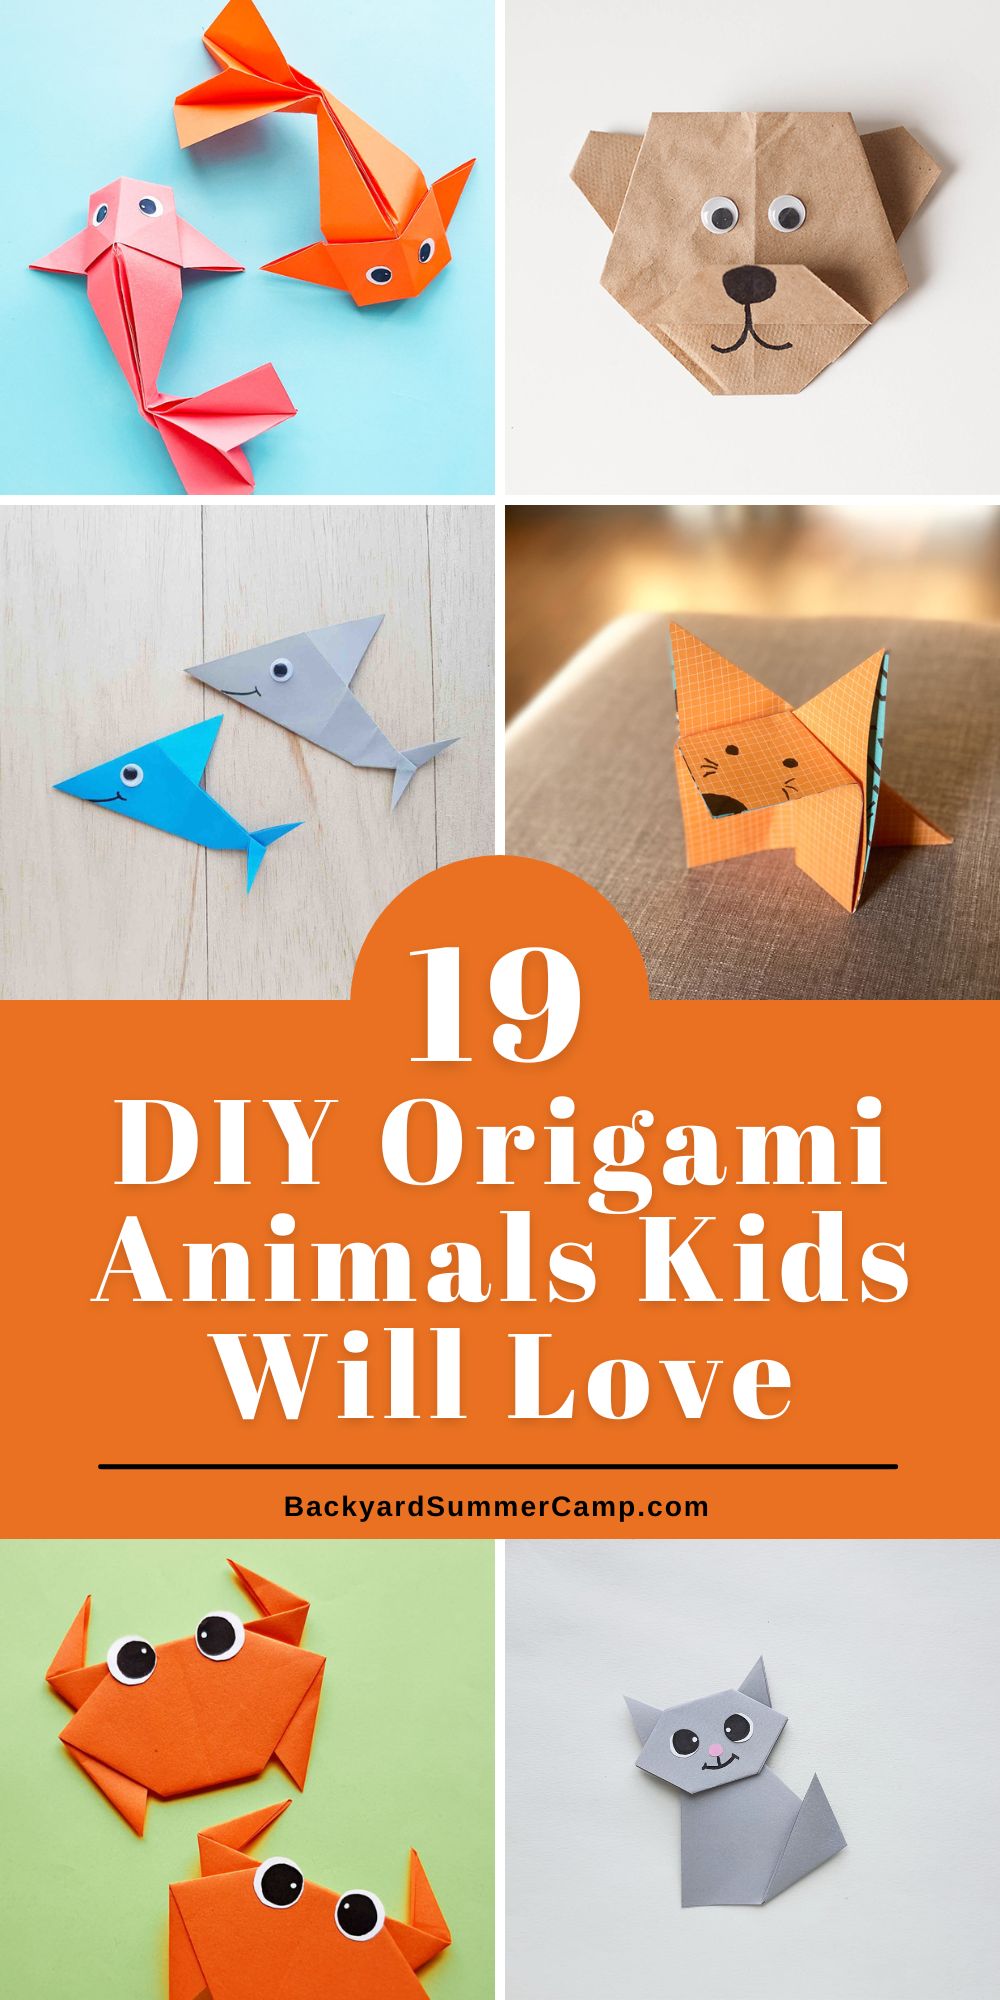 Origami Book for Beginners 4: A Step-by-Step Introduction to the Japanese  Art of Paper Folding for Kids & Adults (Origami Books for Beginners)